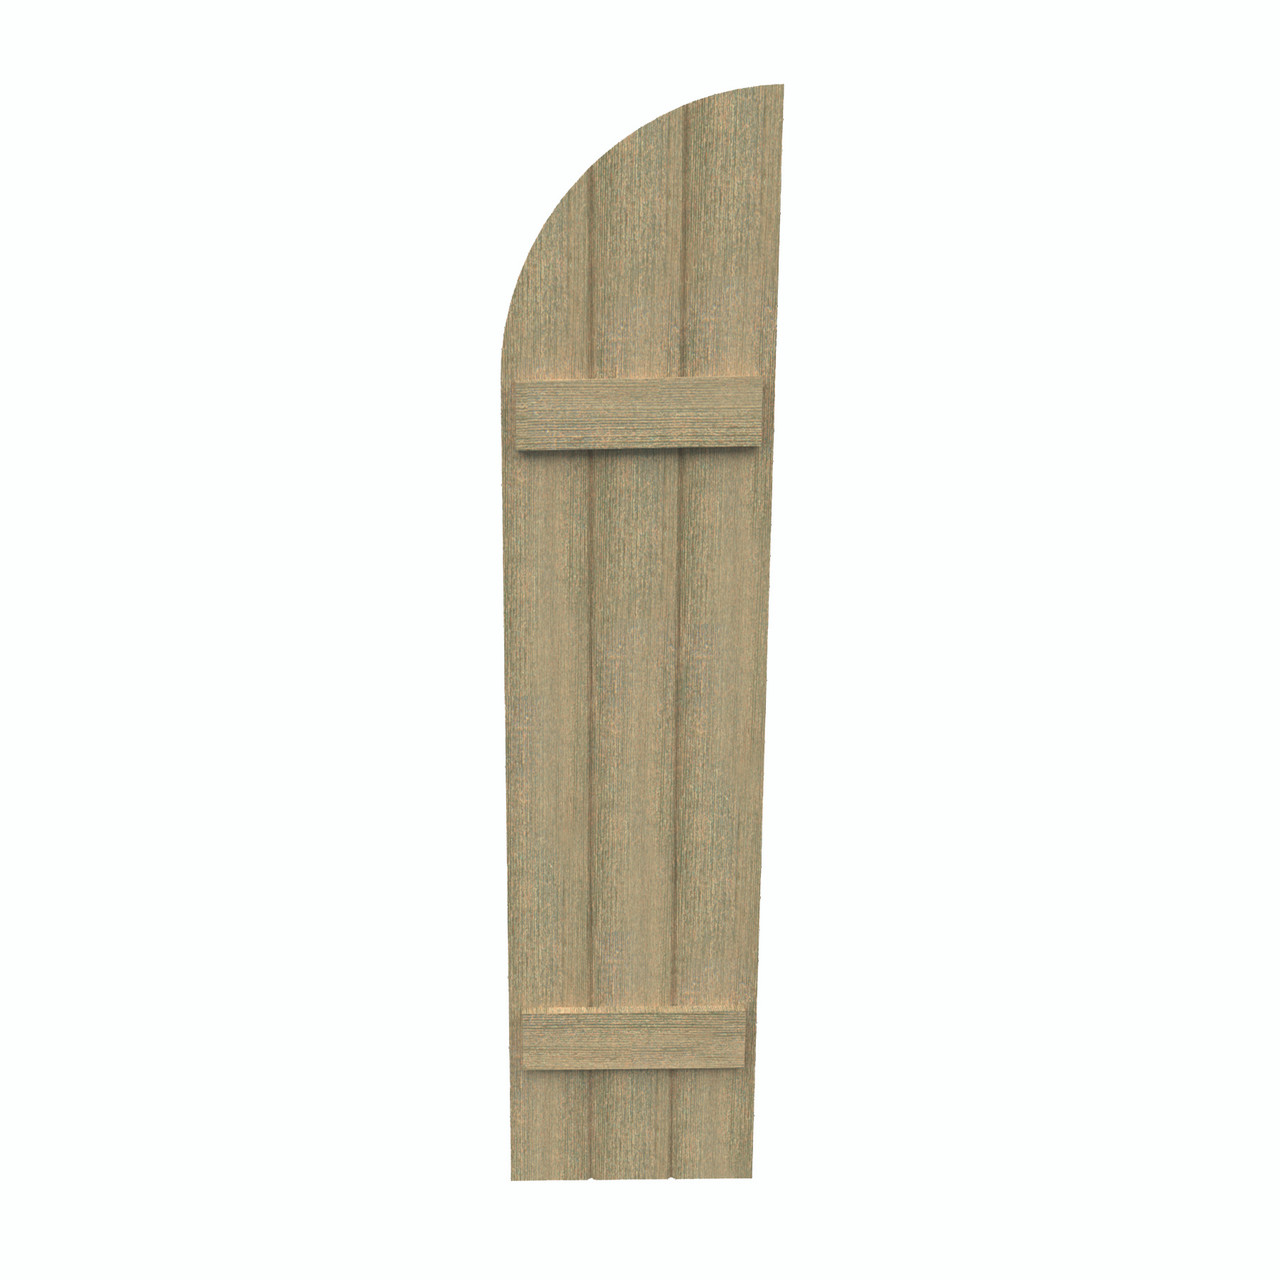 14 inch by 44 inch Quarter Round Shutter with 3-Boards